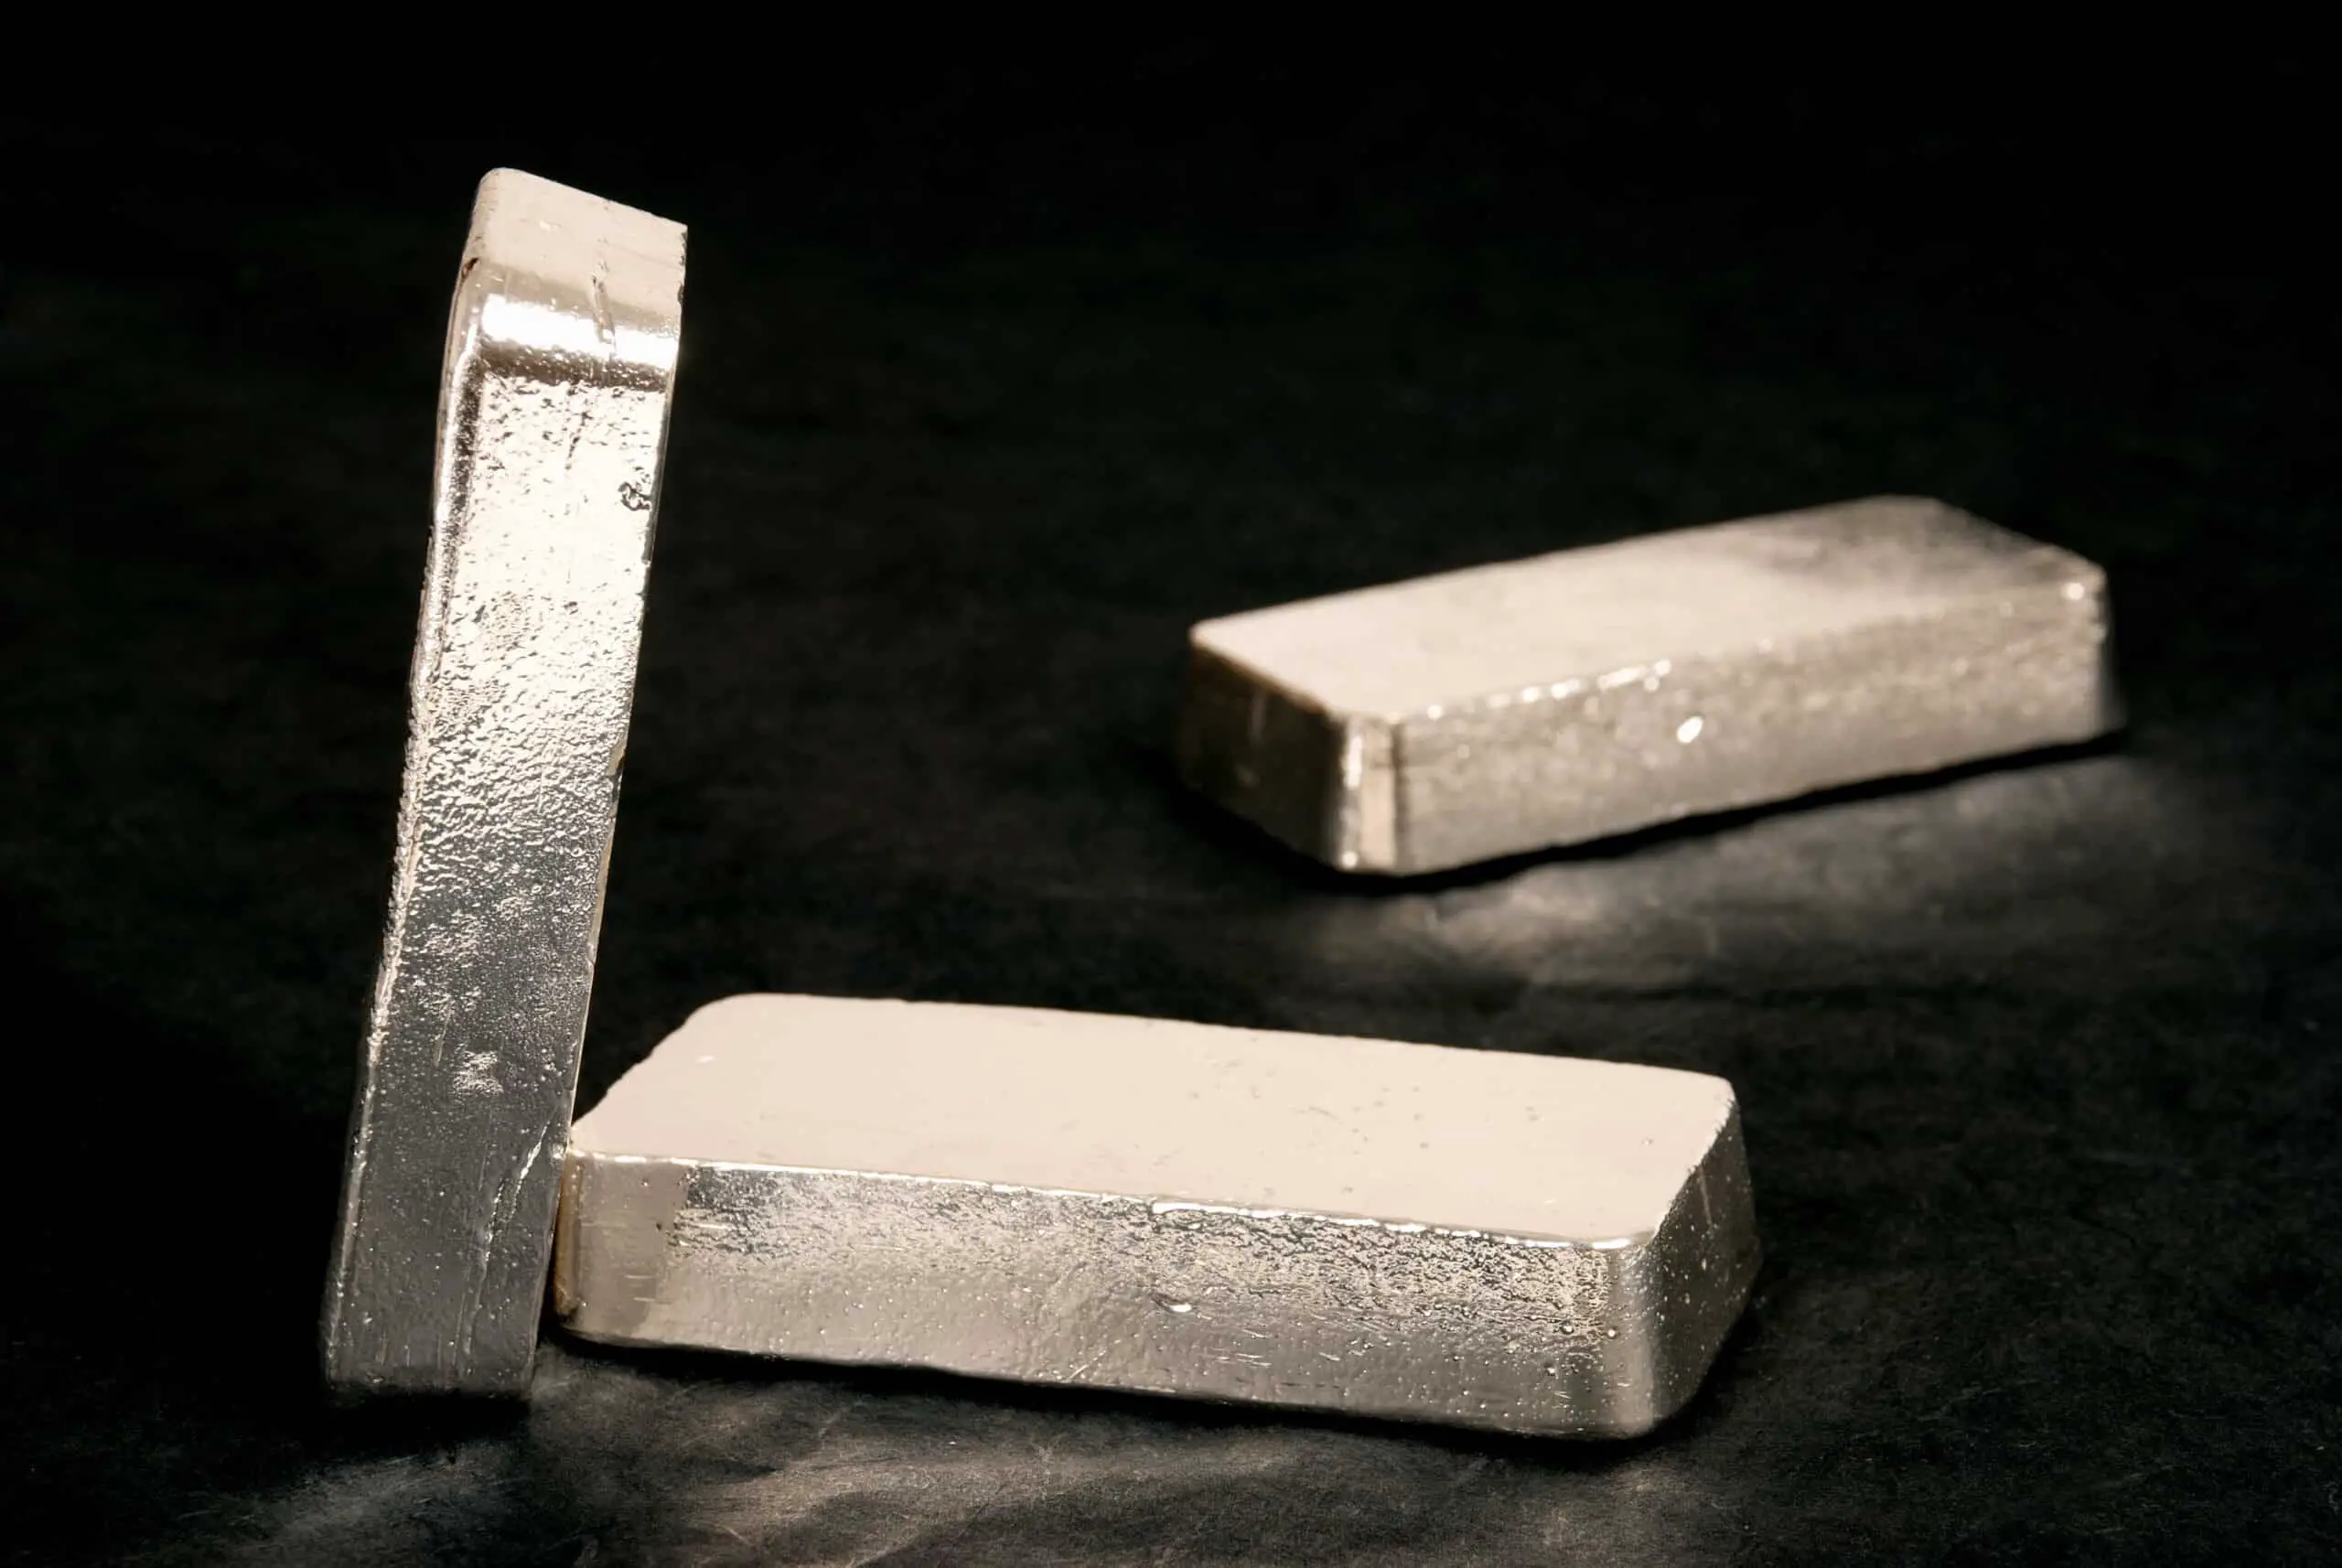 Image of 3 silver bars